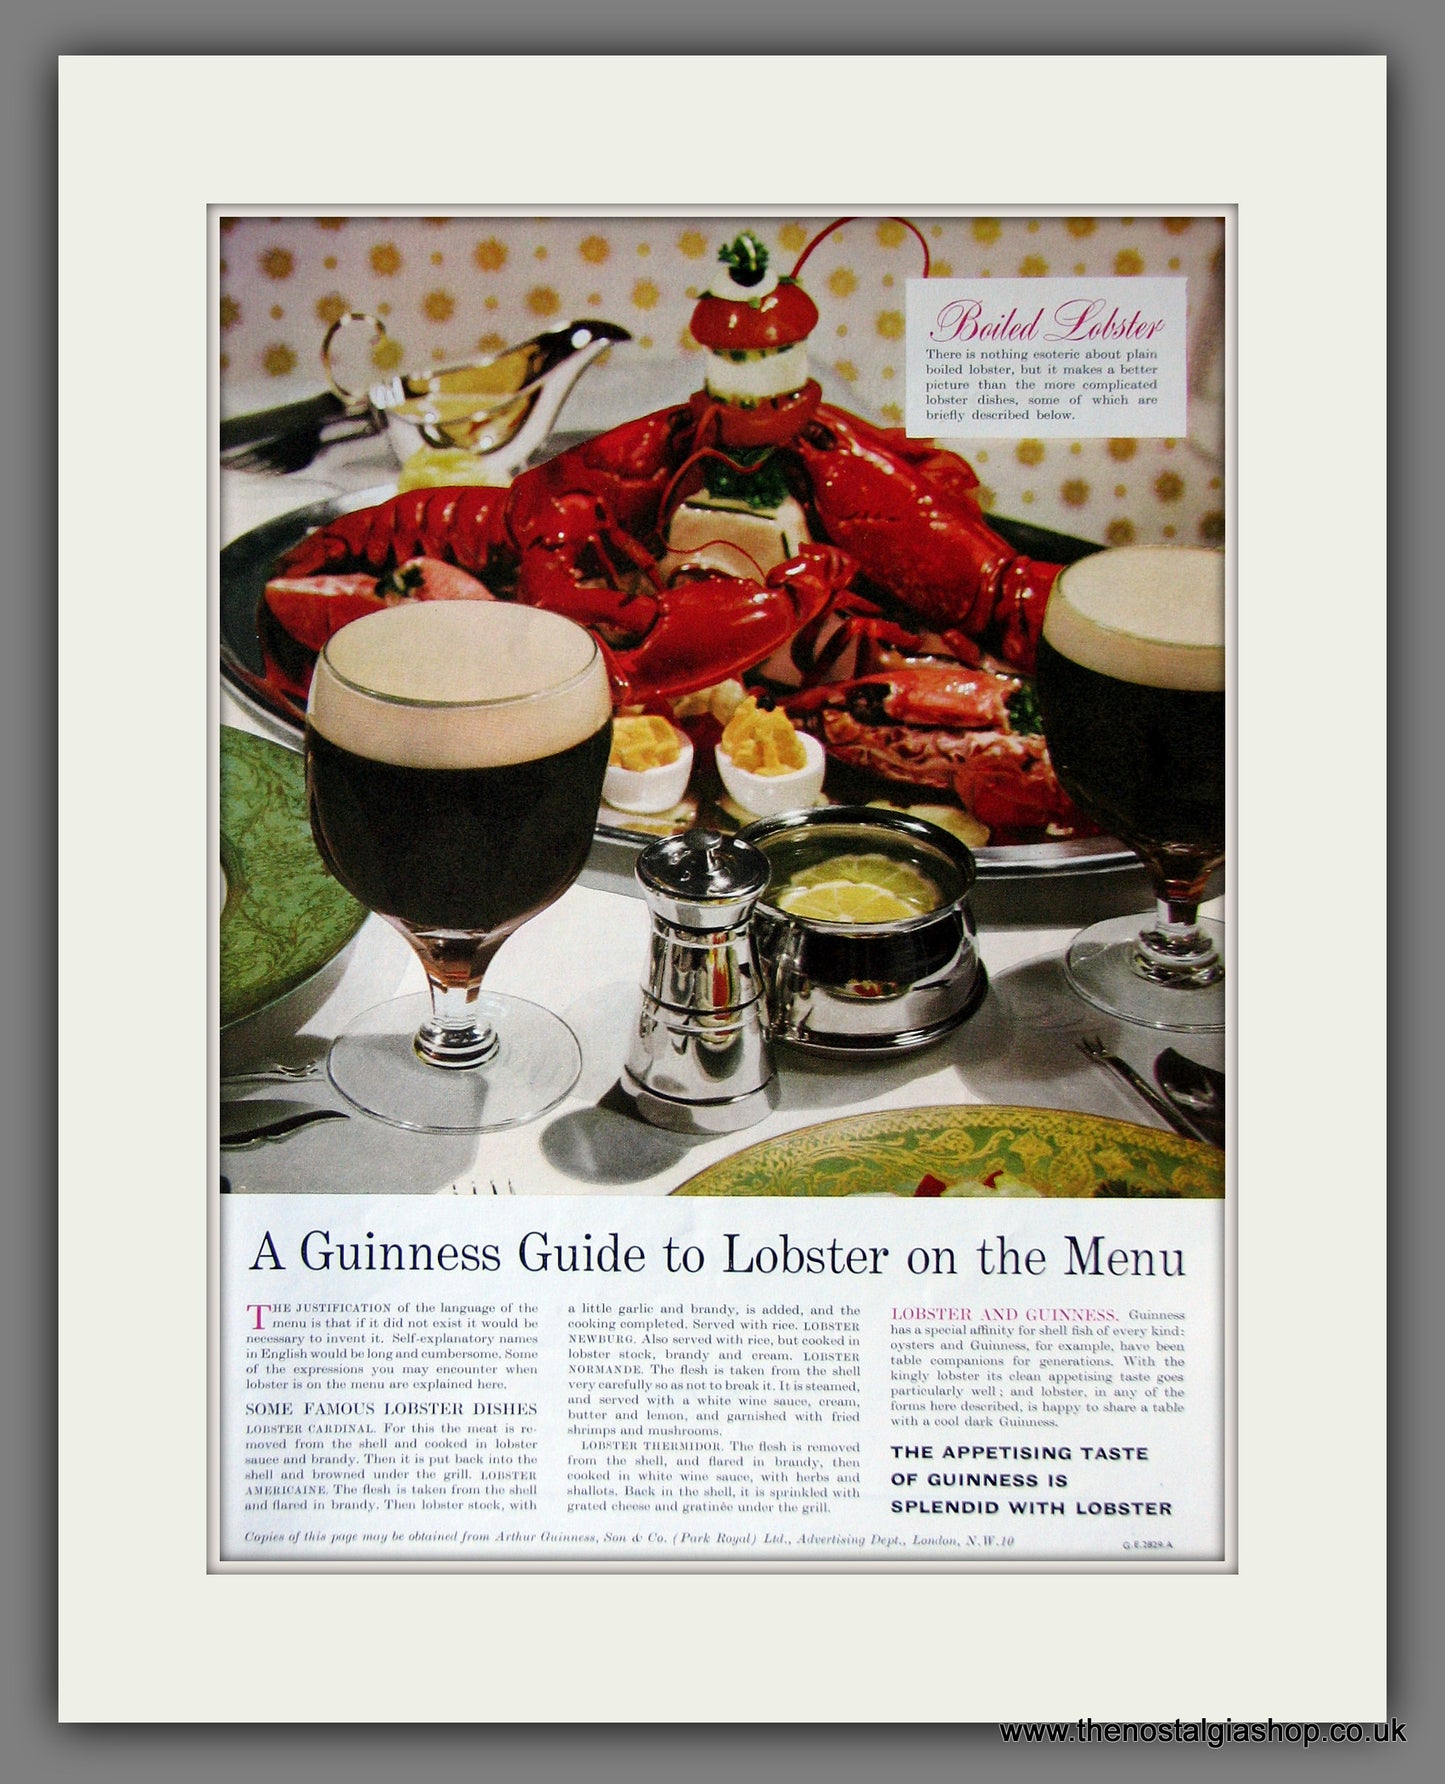 Guinness with Lobster On The Menu. 1958 Original Advert  (ref AD56343)